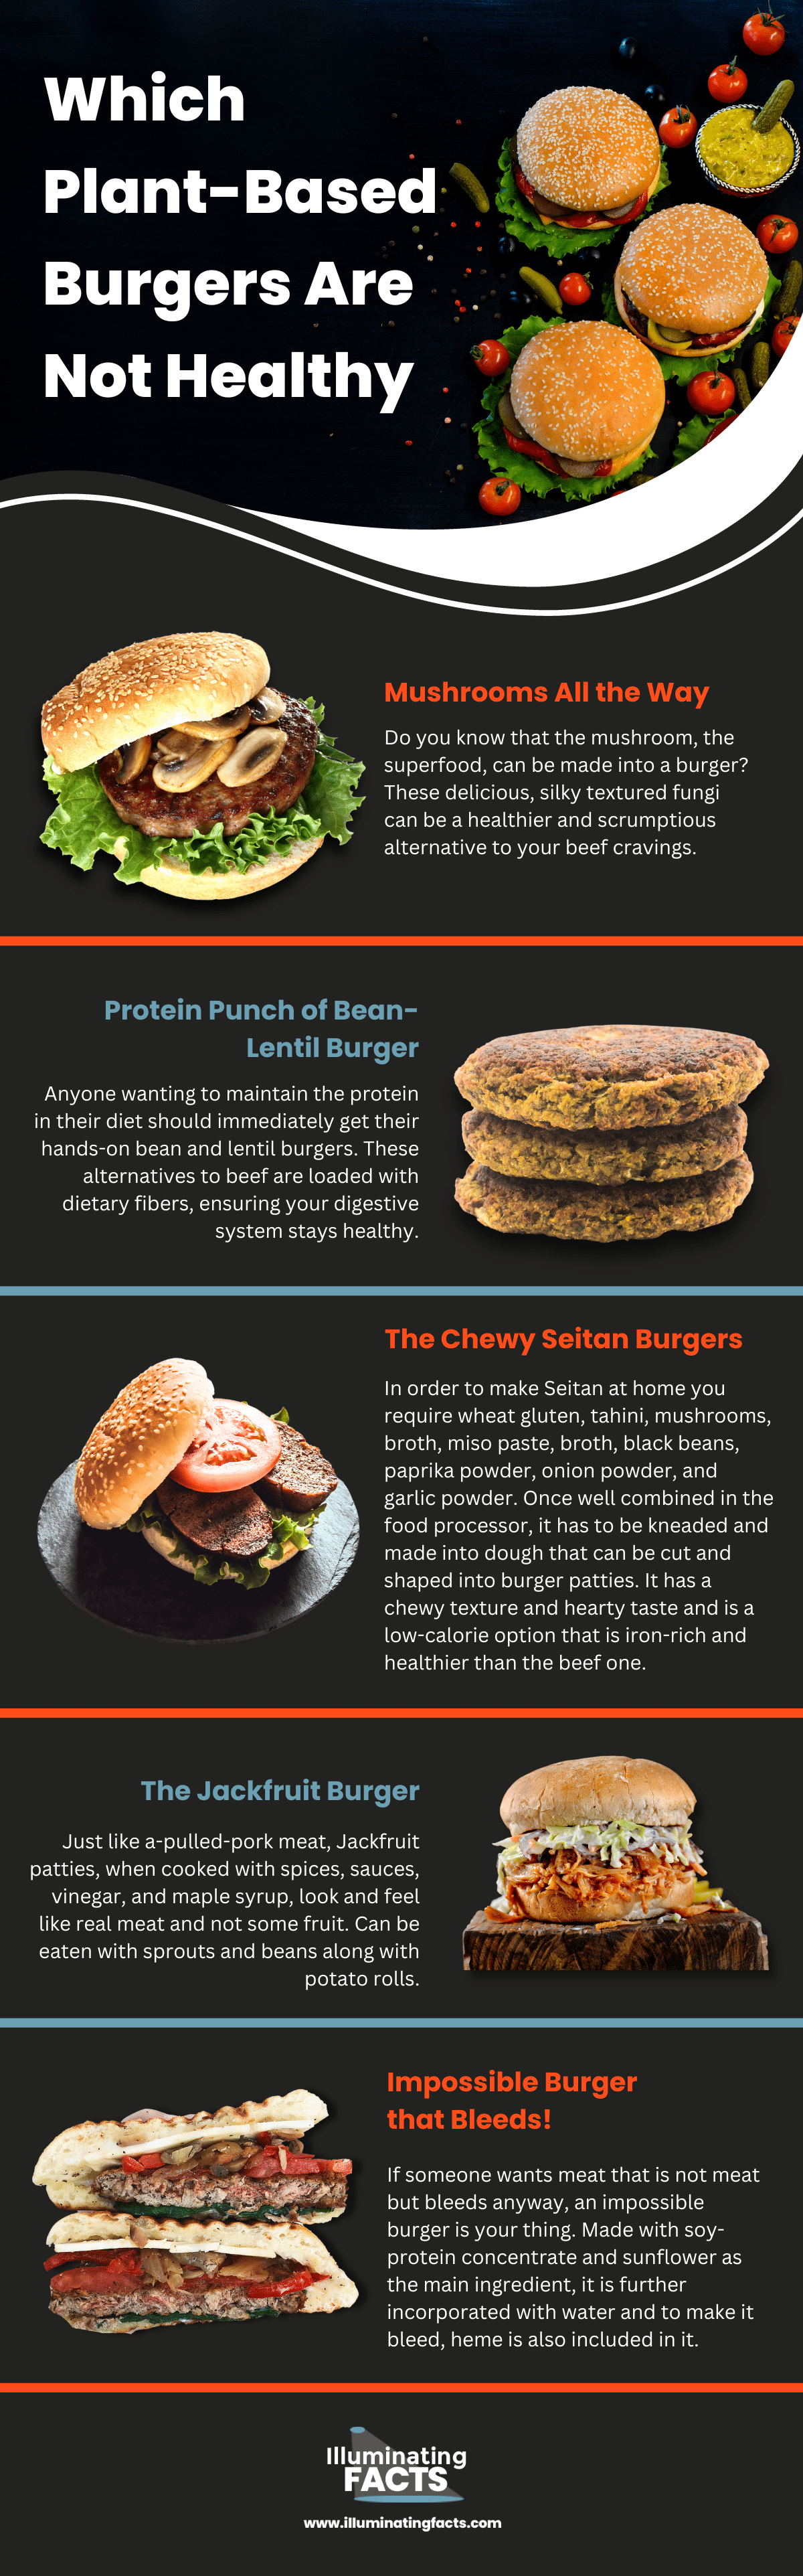 Which Plant-Based Burgers Are Not Healthy